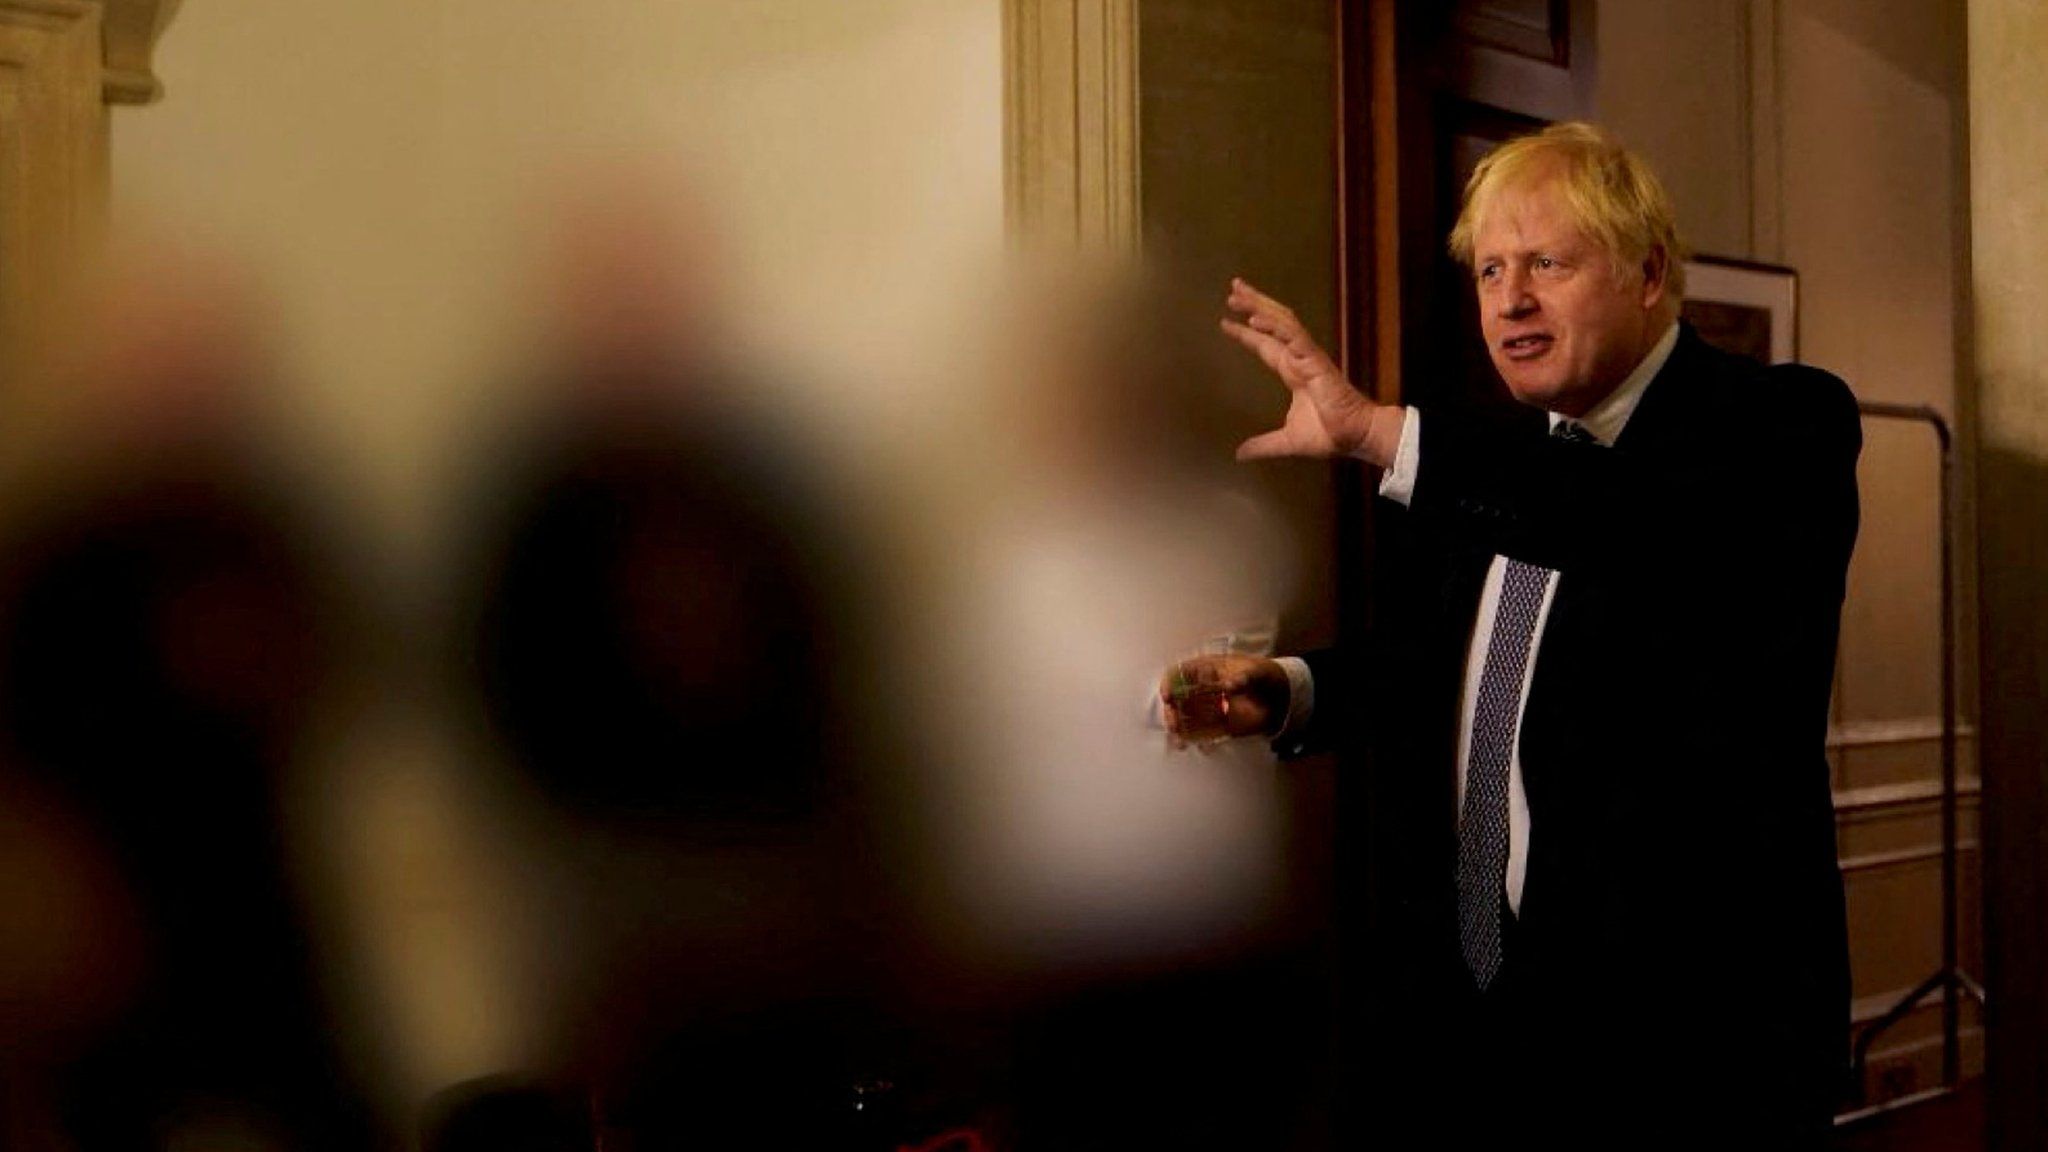 Boris Johnson holding a glass of wine at an event in Downing Street on 13 Novemebr 2020